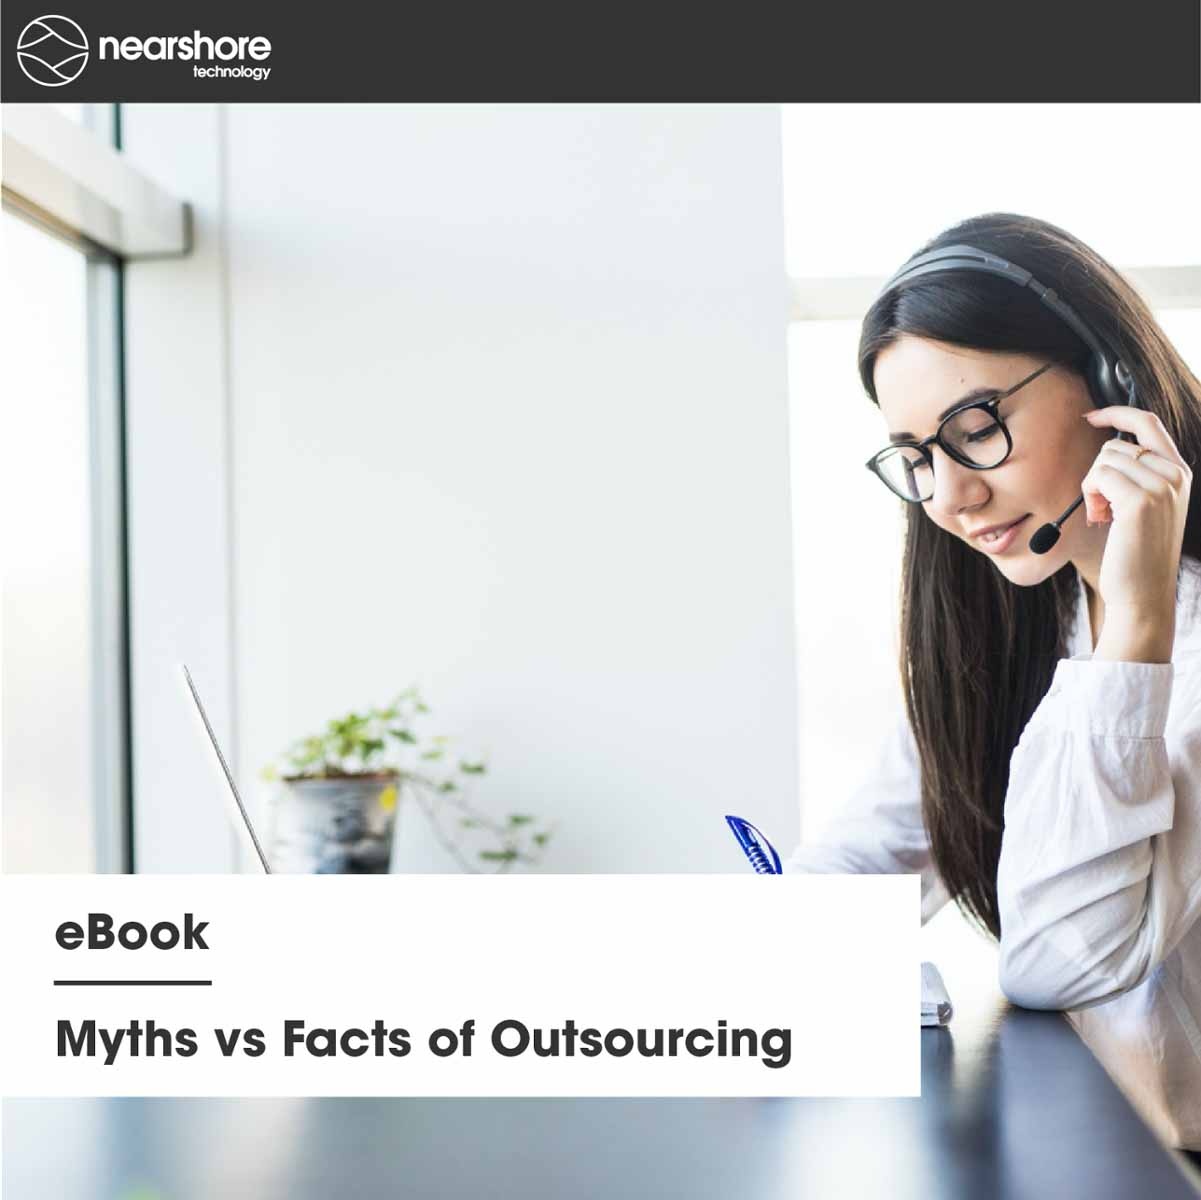 eBook: Myths vs Facts of Outsourcing